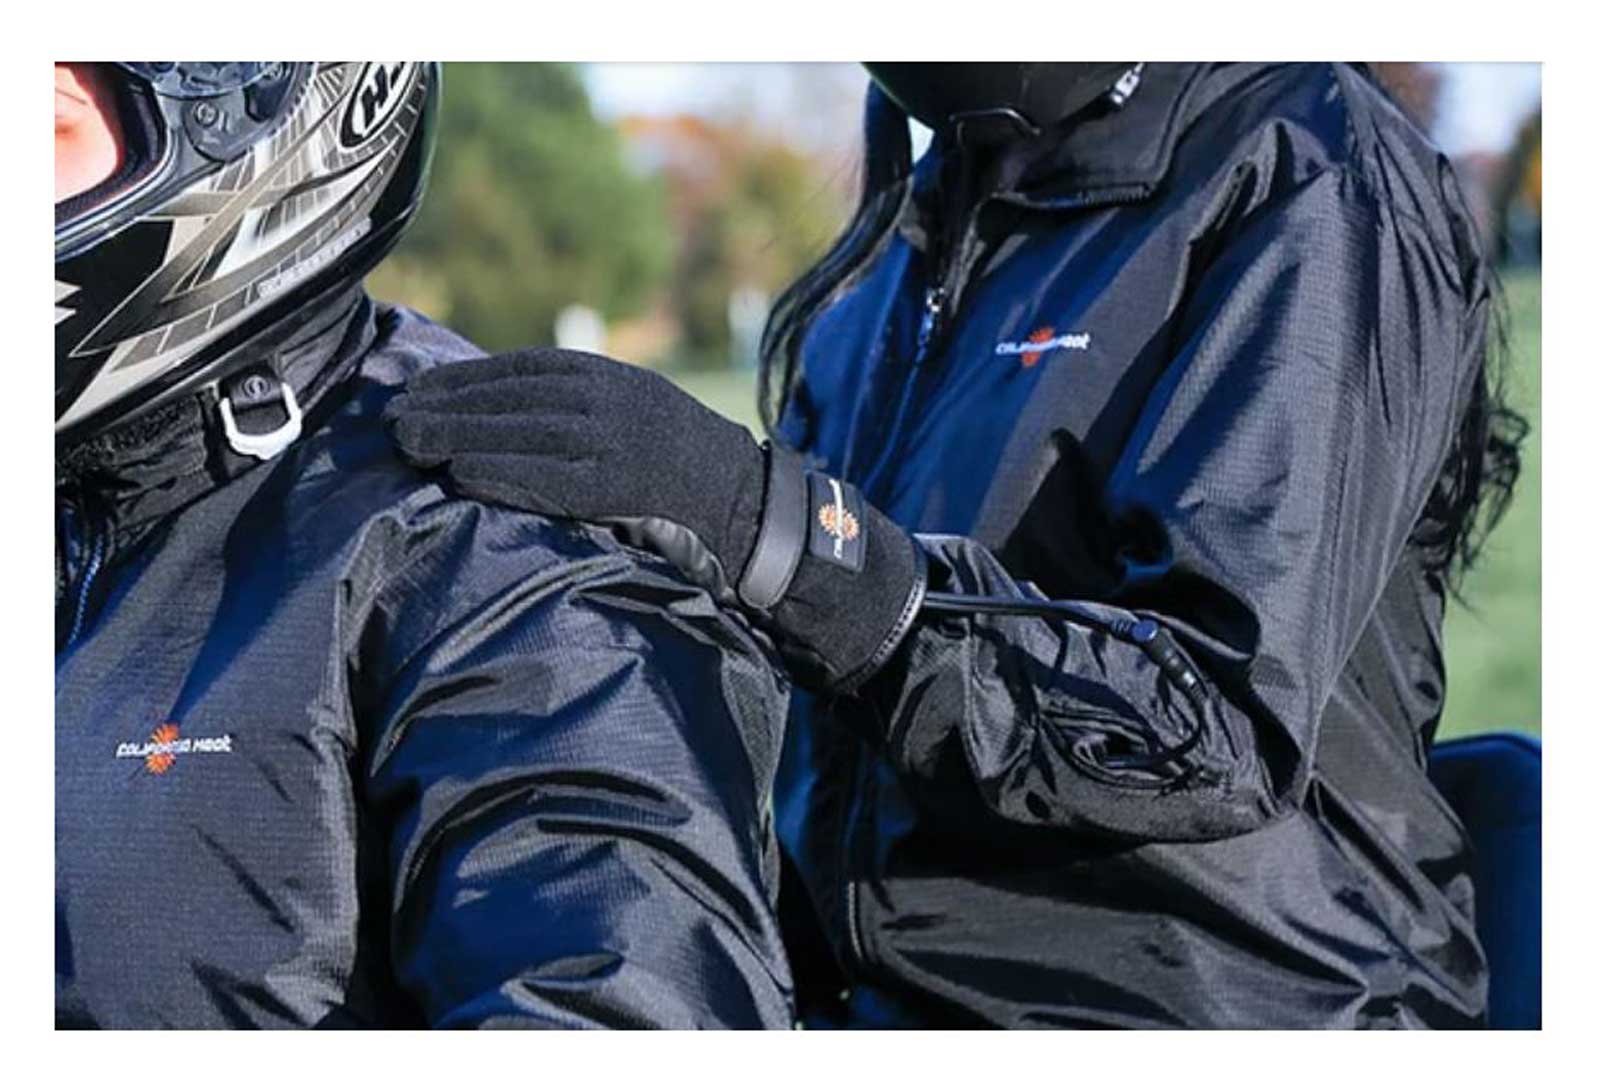 California Heat 12V Motorcycle Heated Jacket Liner - The Warming Store